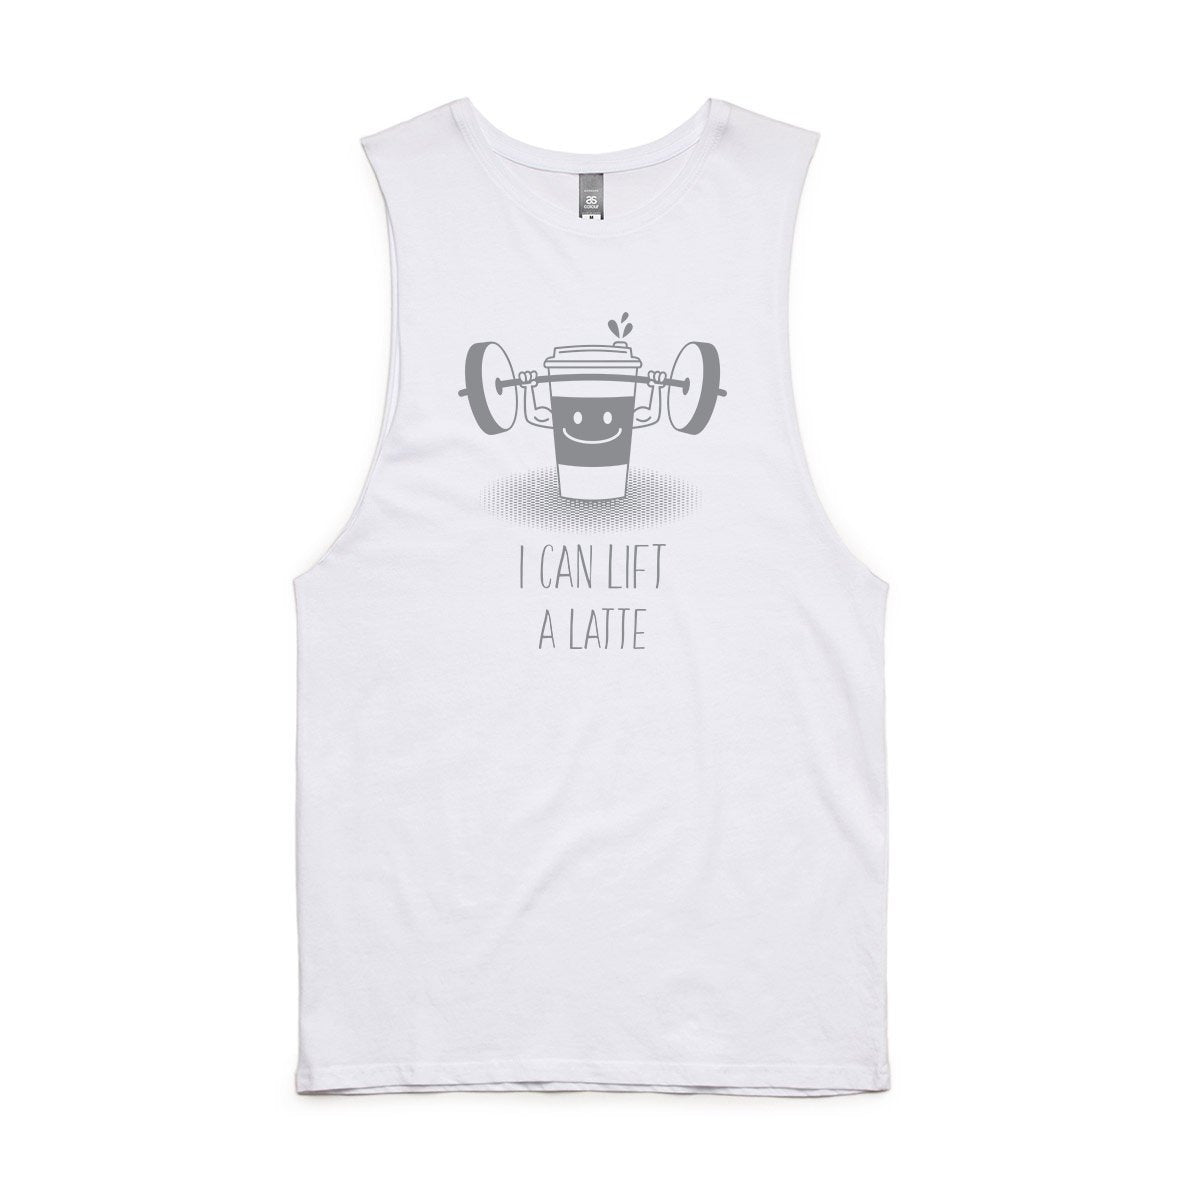 I Can Lift A Latte - Mens Tank Top Tee White Mens Tank Fitness Mens